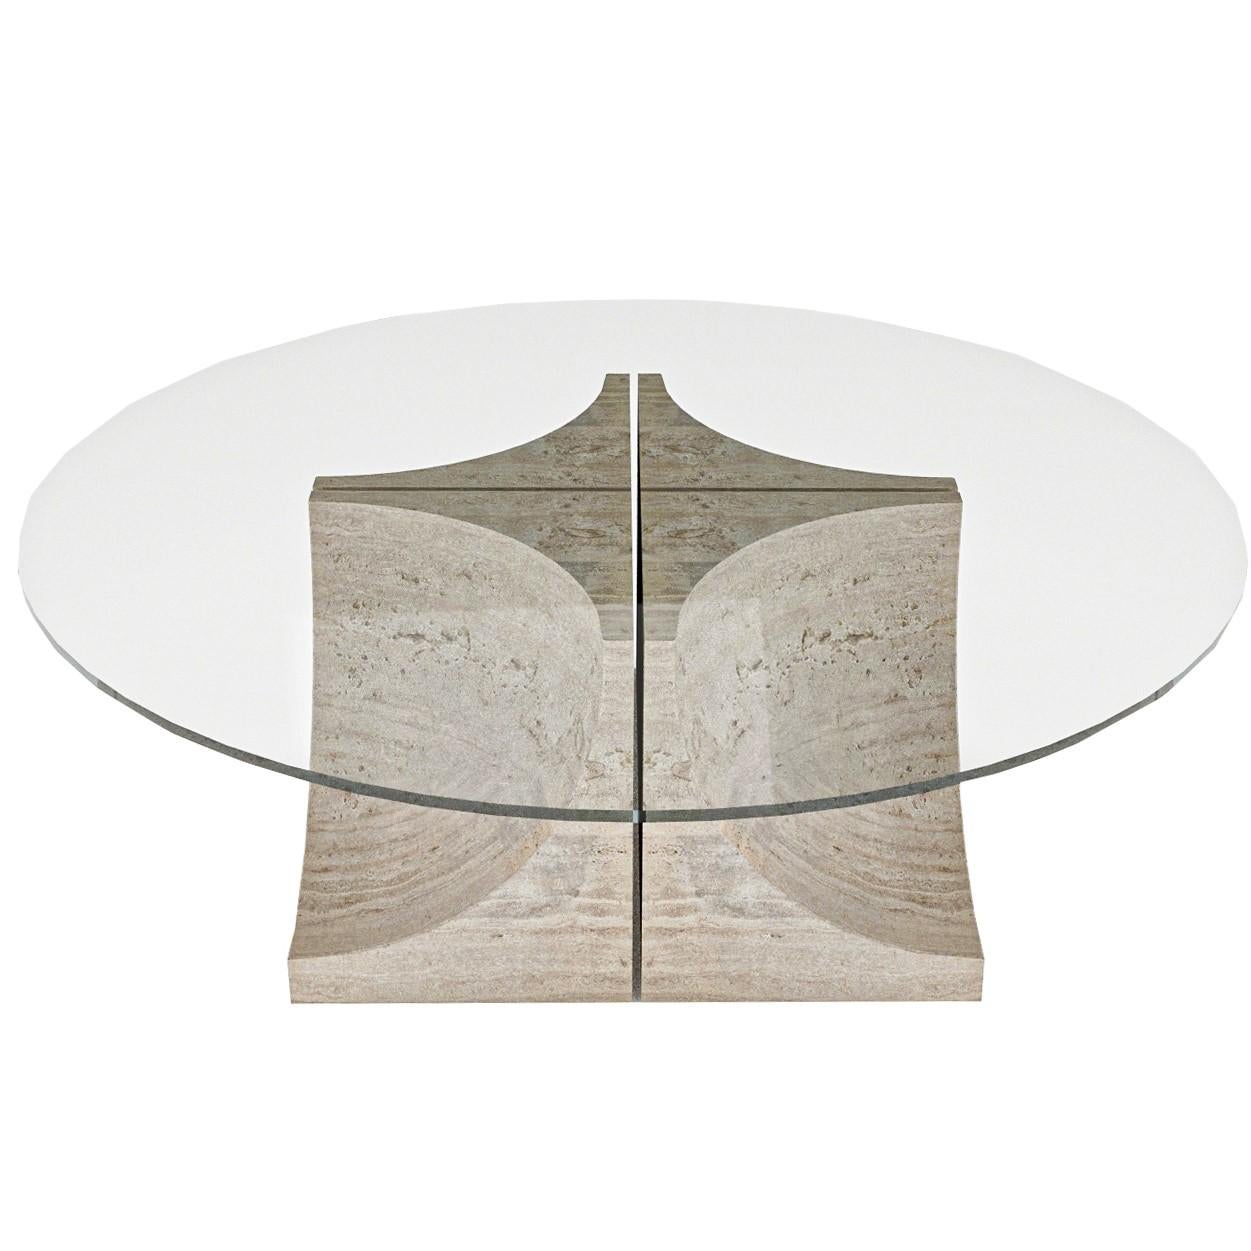 Unique edge center table 4 Legs by Collector
Dimensions: D 80 x H 35 cm
Materials: Glass, Travertino
Other materials available.

The Collector brand aims to be part of the daily life by fusing furniture to our home routine and lifestyle, that’s